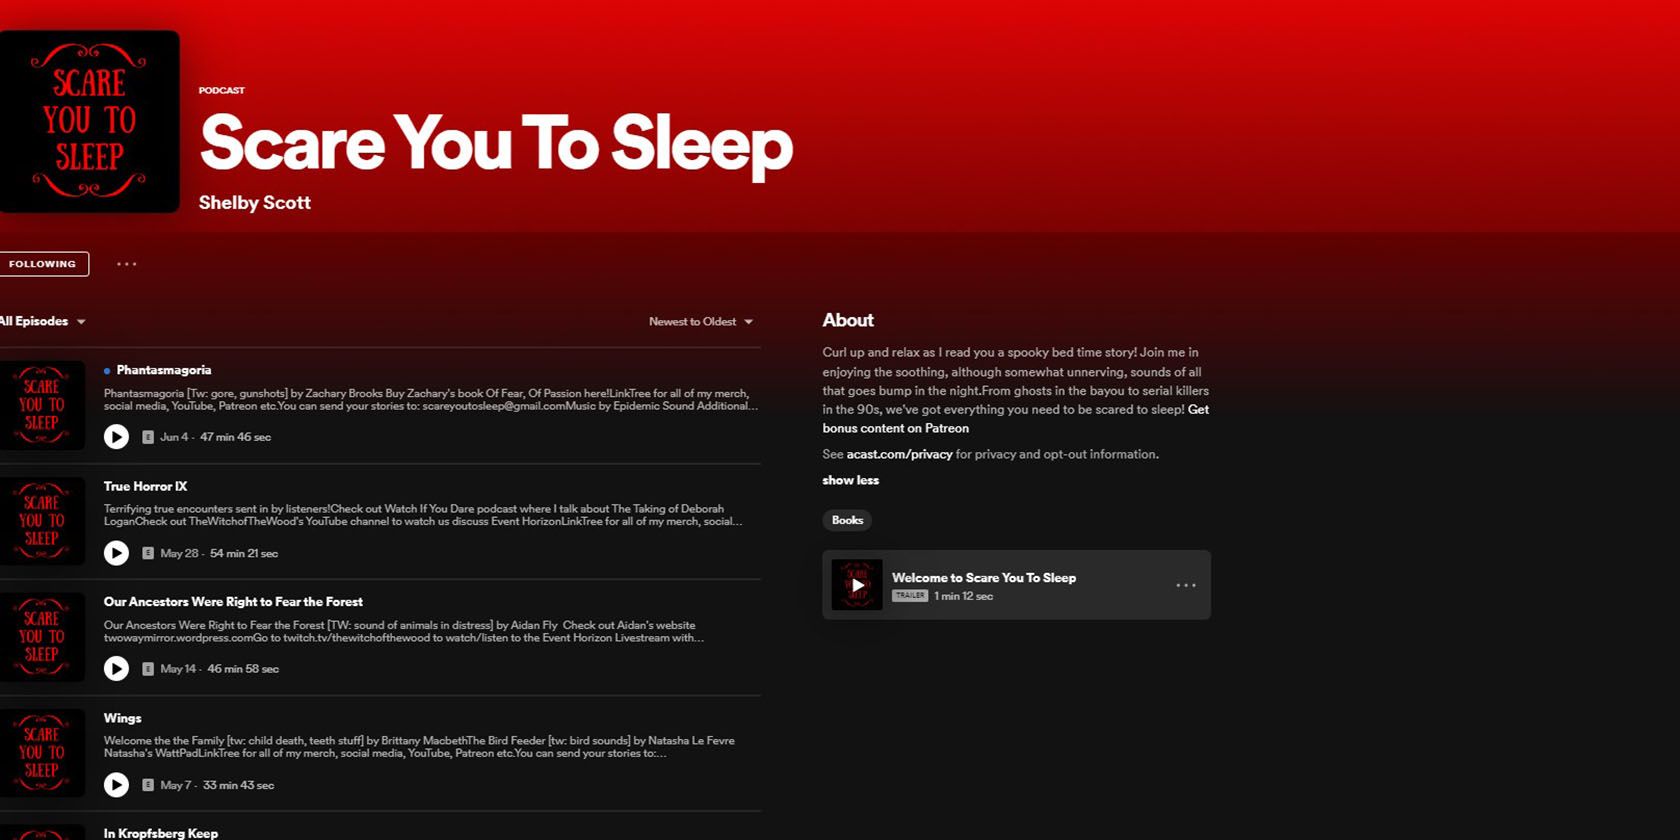 Scare You To Sleep Podcast on Spotify